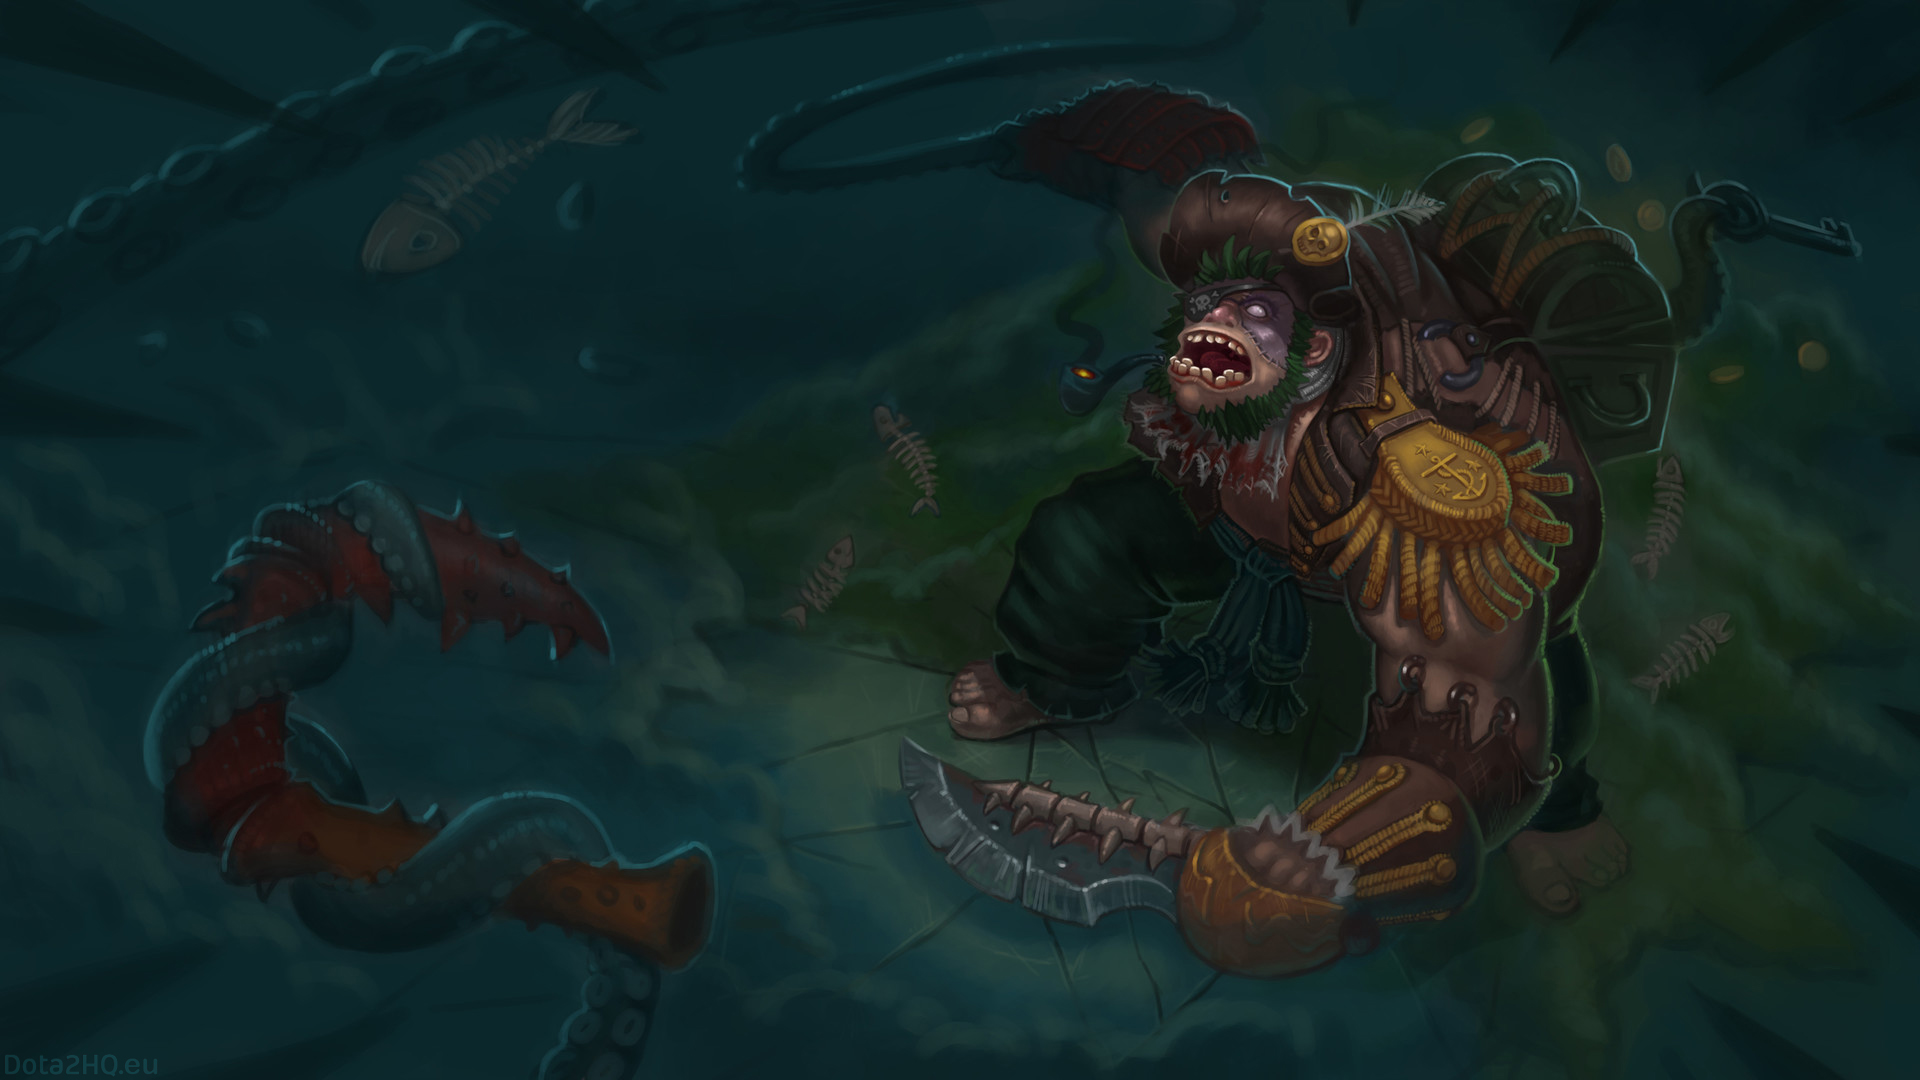 Pirate Pudge Wallpaper - Mythical Creature , HD Wallpaper & Backgrounds